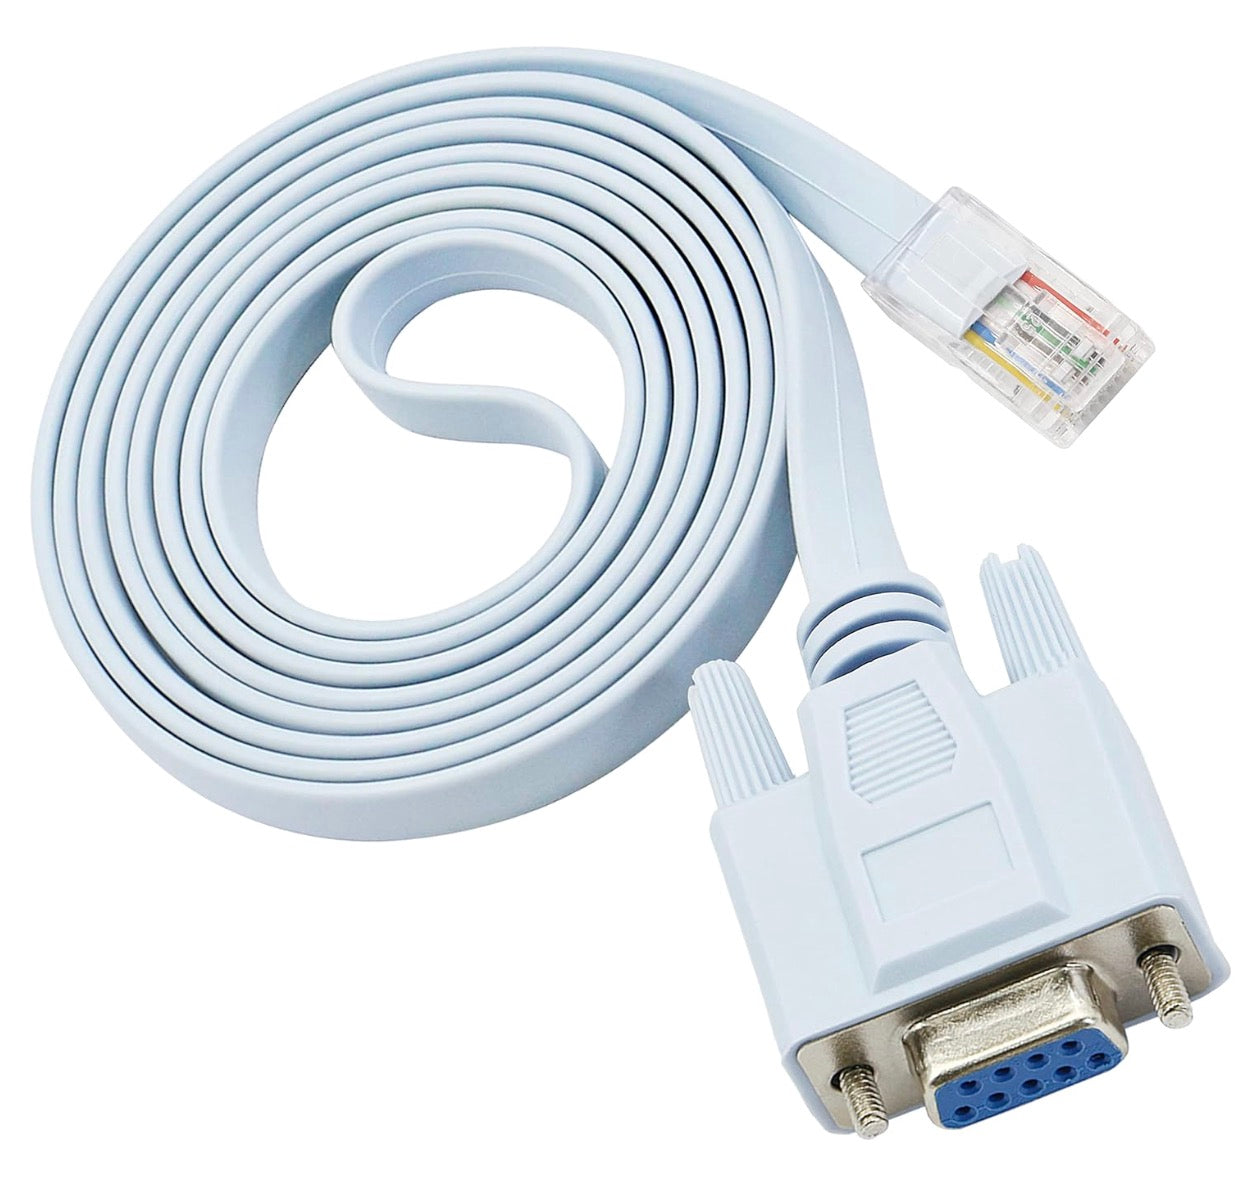 RJ45 to RS232 DB9 Female Serial Port Cable for Console Switches and Firewall Equipment